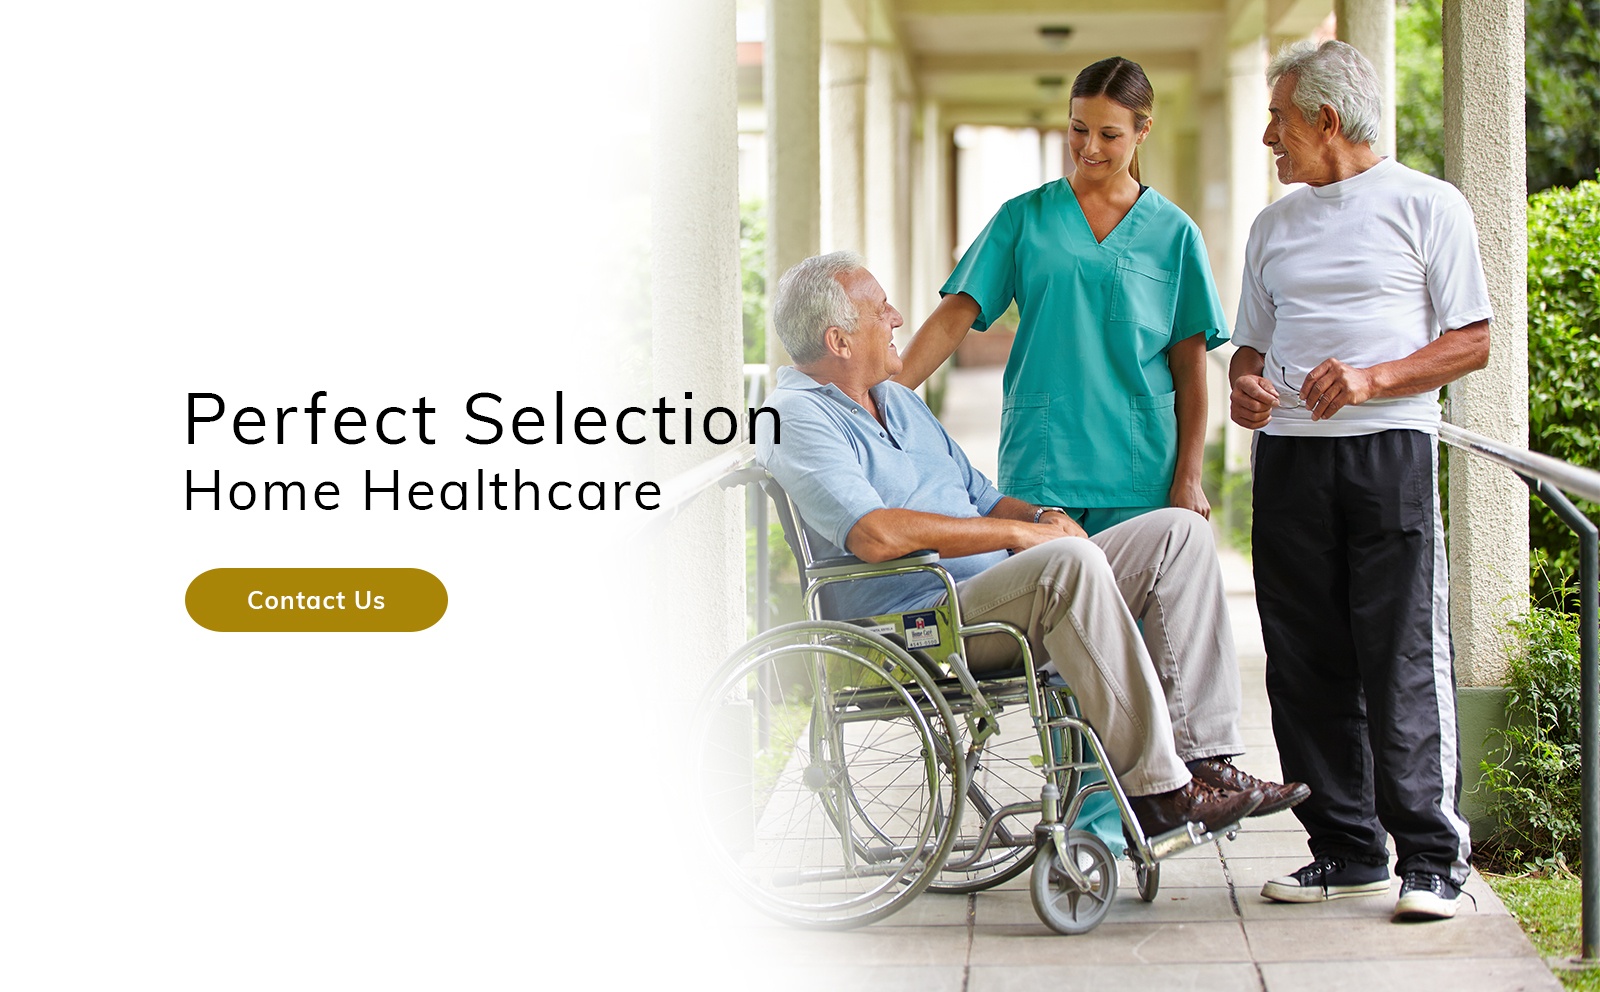 We Provide Excellent and Quality Care with the Best Qualified Experienced Healthcare Professionals